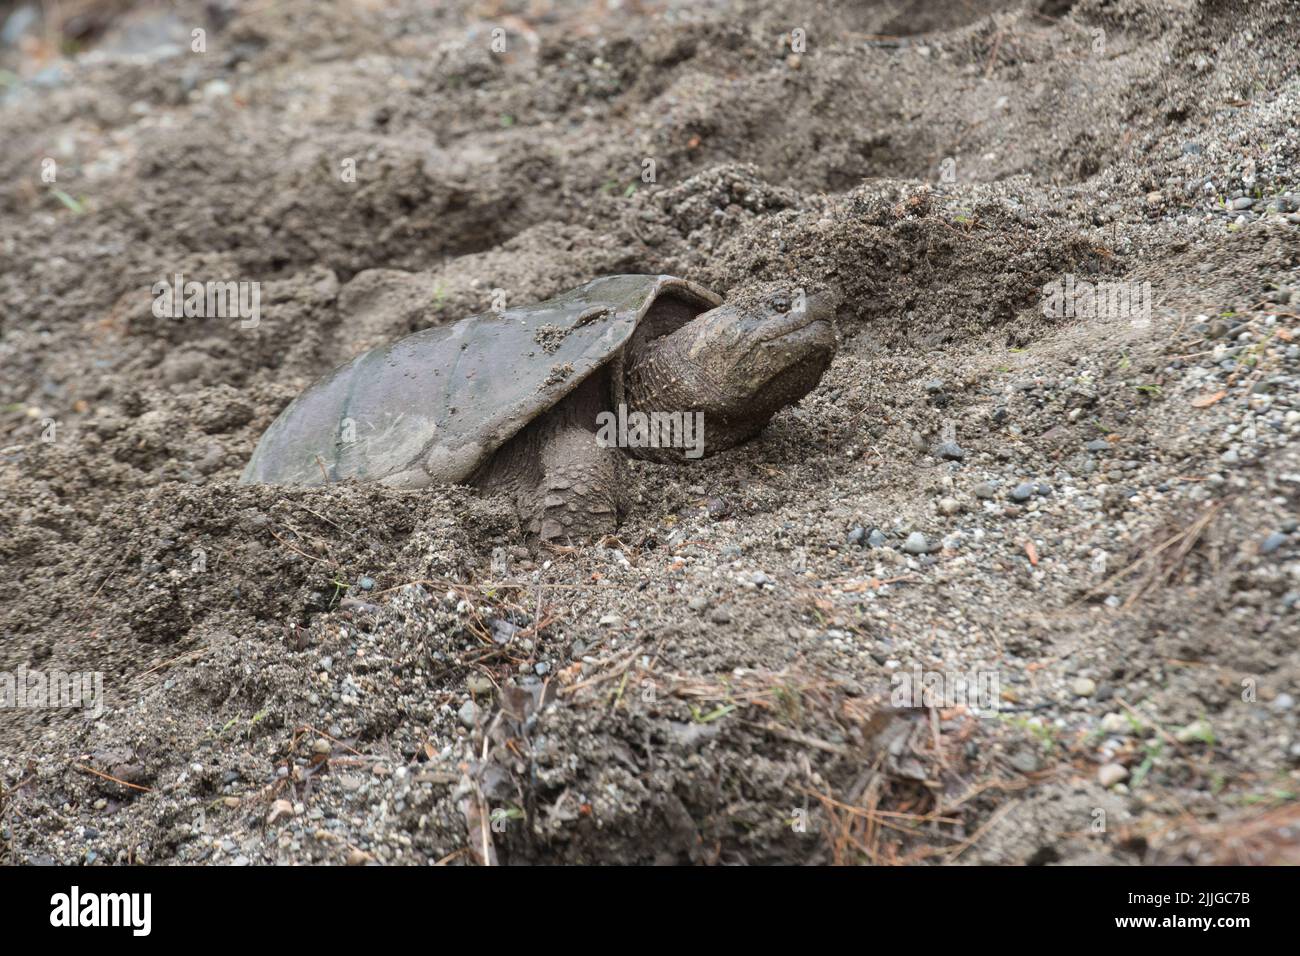 A snapping turtle in the gravely sand in Acadia National Park, Maine, USA Stock Photo